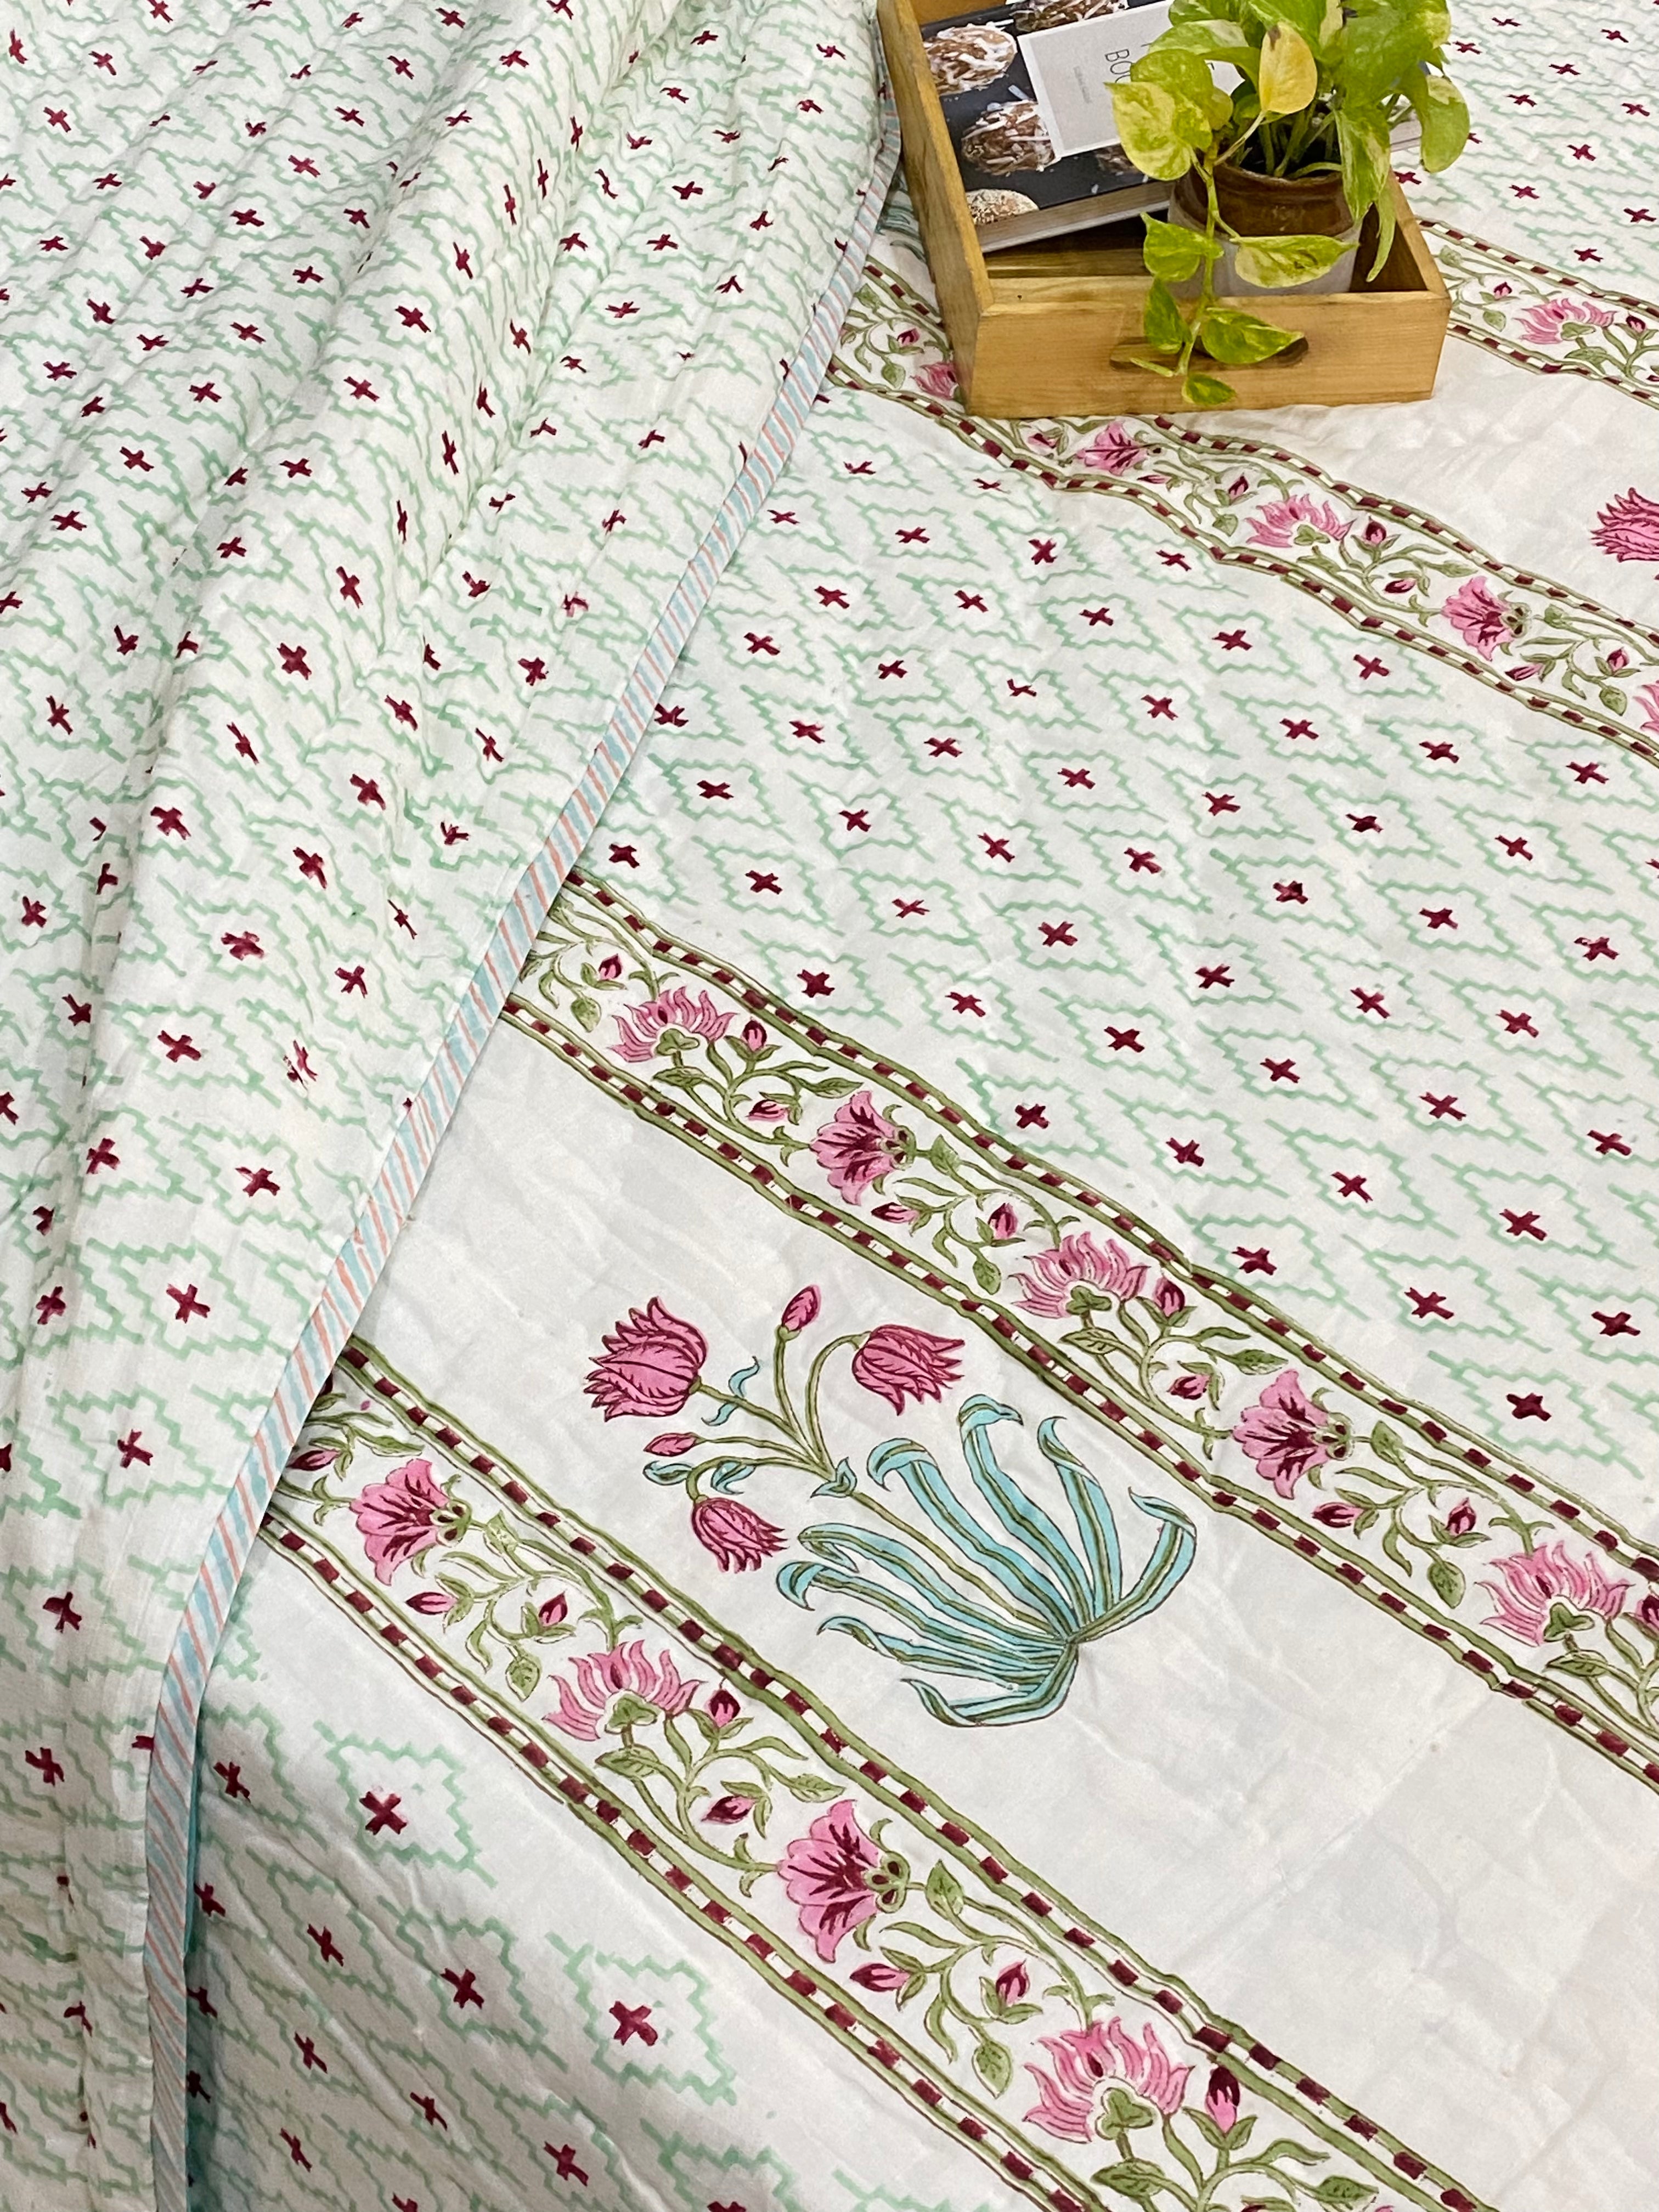 Blockprint Mulmul Reversible Quilt- King Size (108*108 inches)